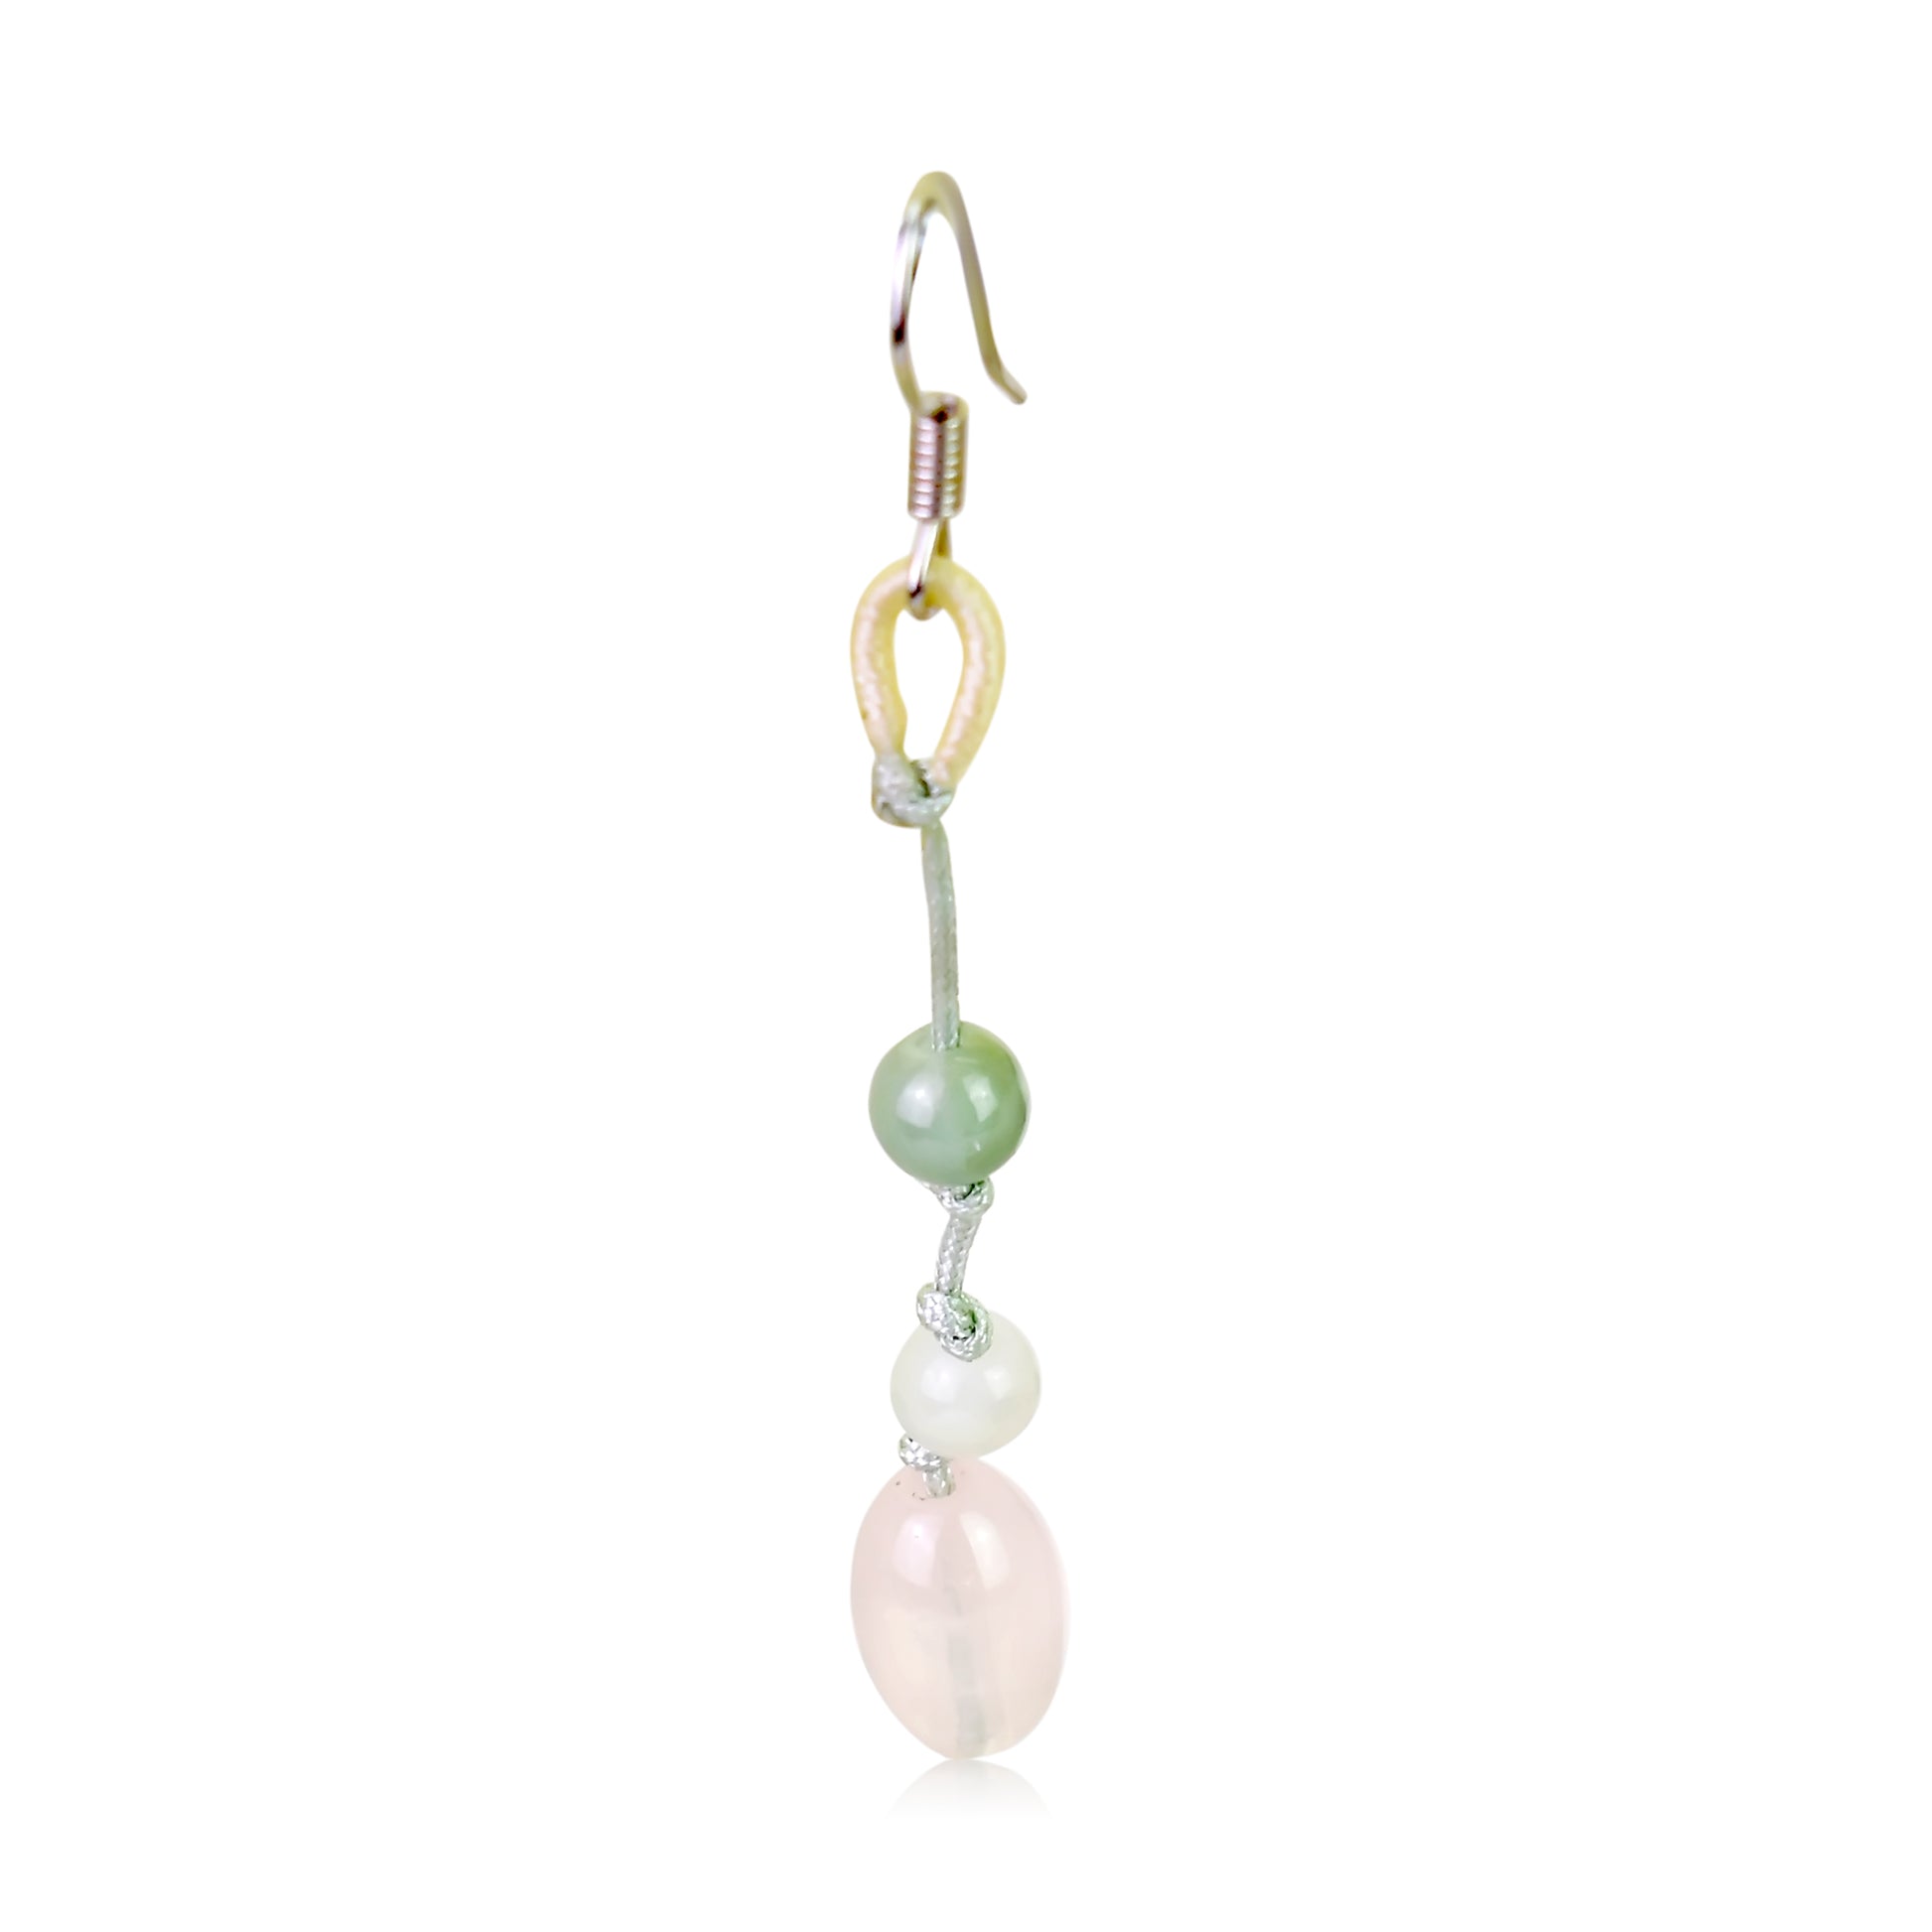 Shine Bright with Engaging Oblong Rose Quartz Earrings made with White Cord